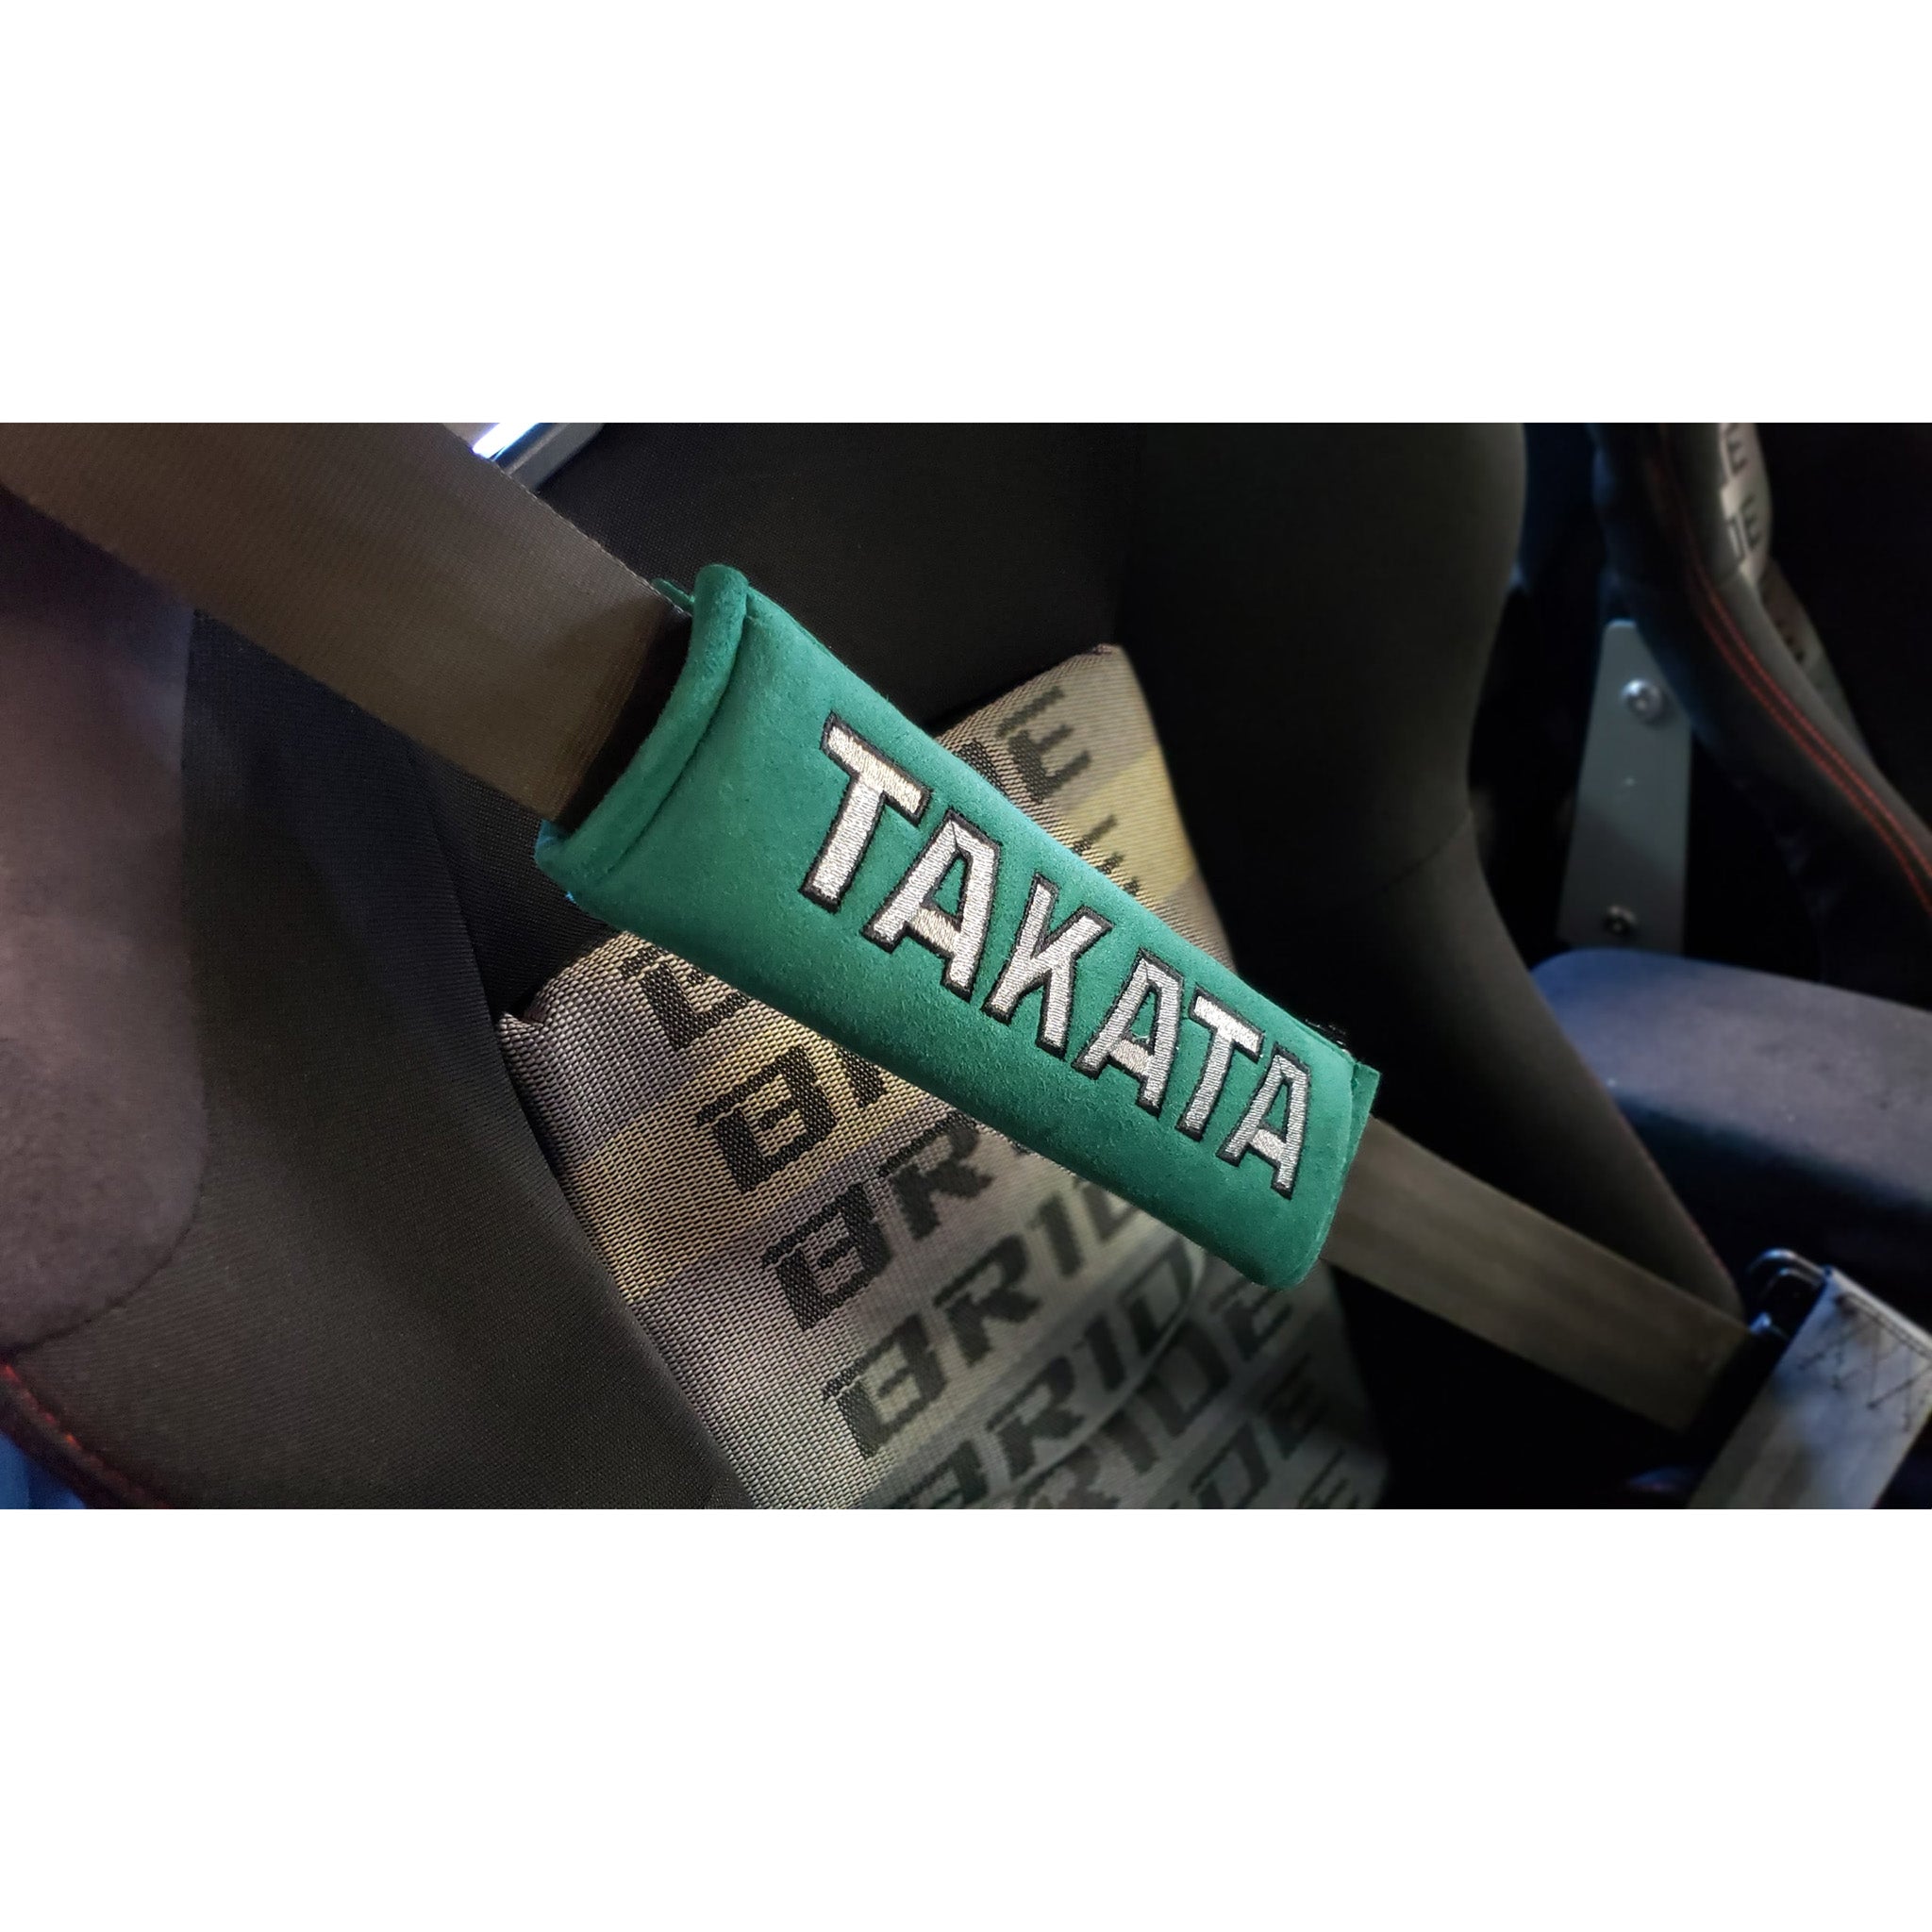 Takata comfort seat belt shoulder pads in green attached to seat belt in a car.